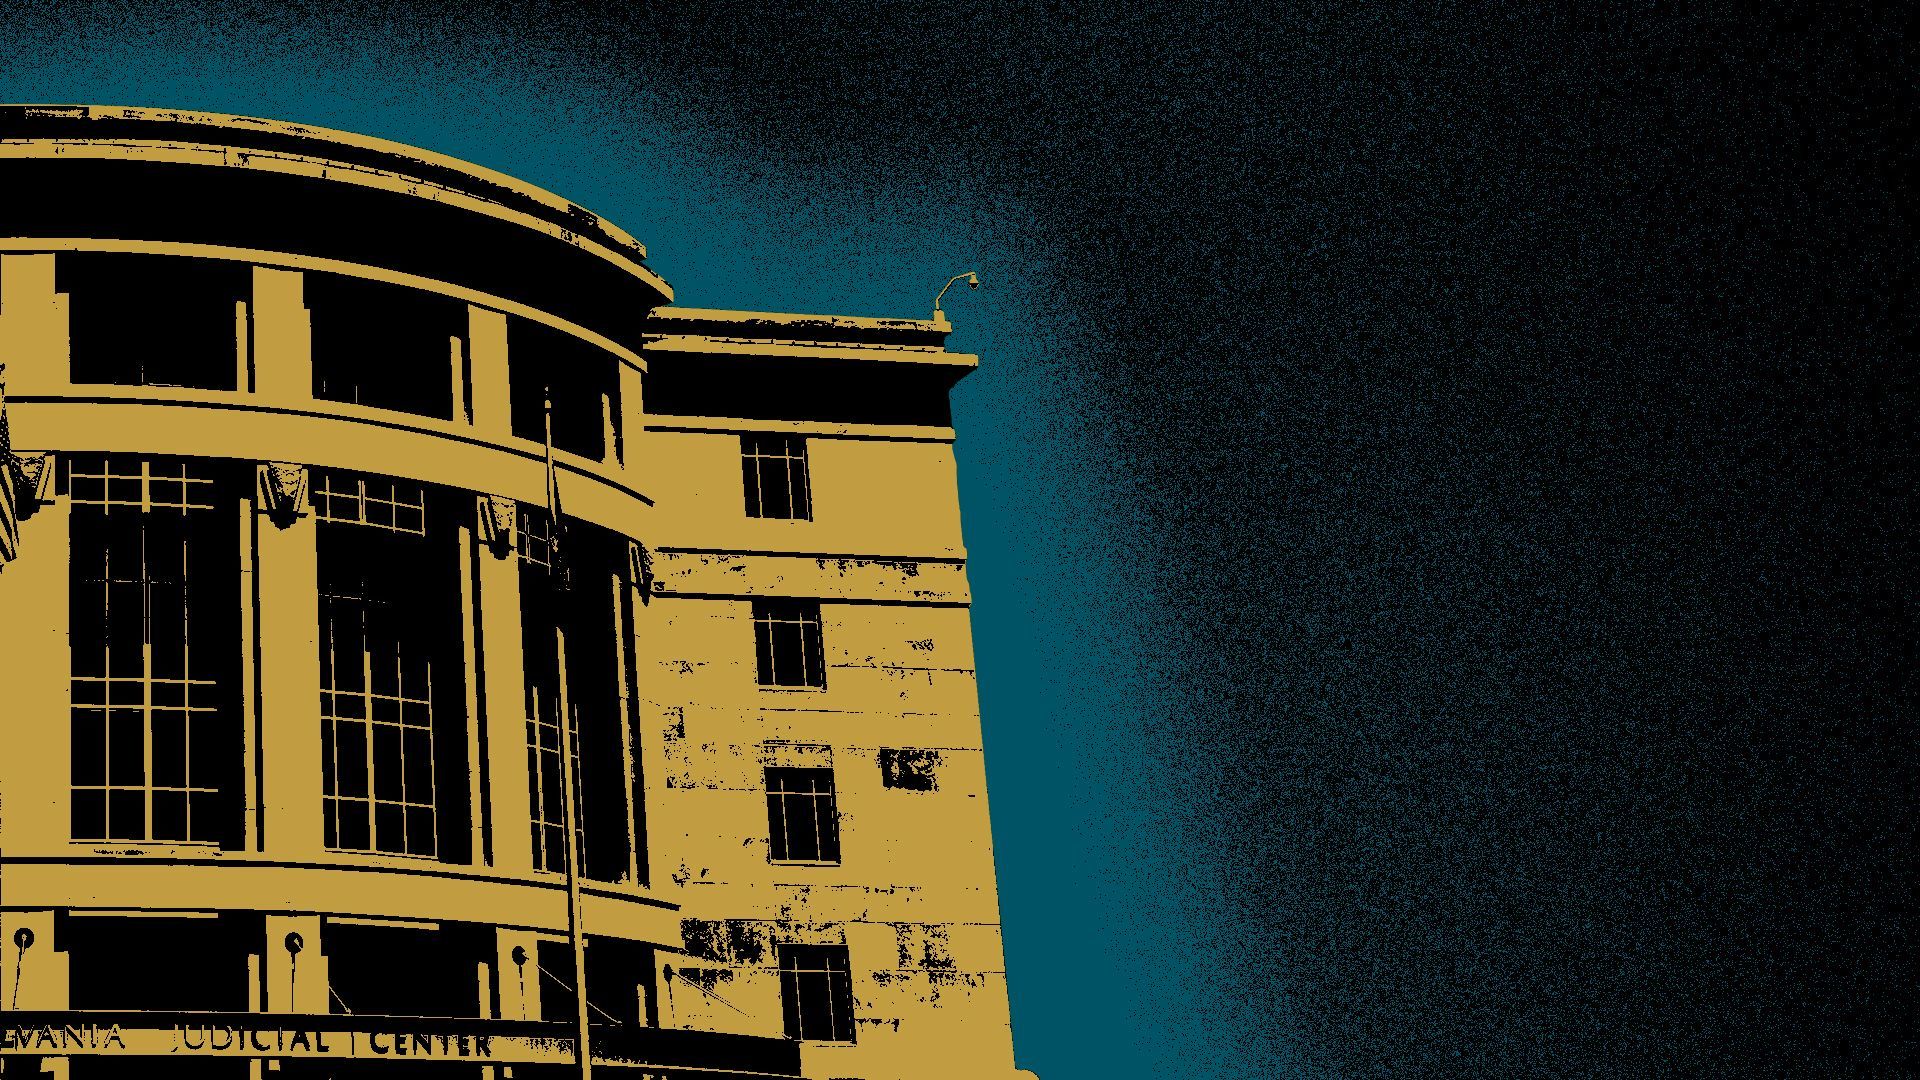 Illustration of the Pennsylvania Judicial Center in Harrisburg over a grainy blue and black background.